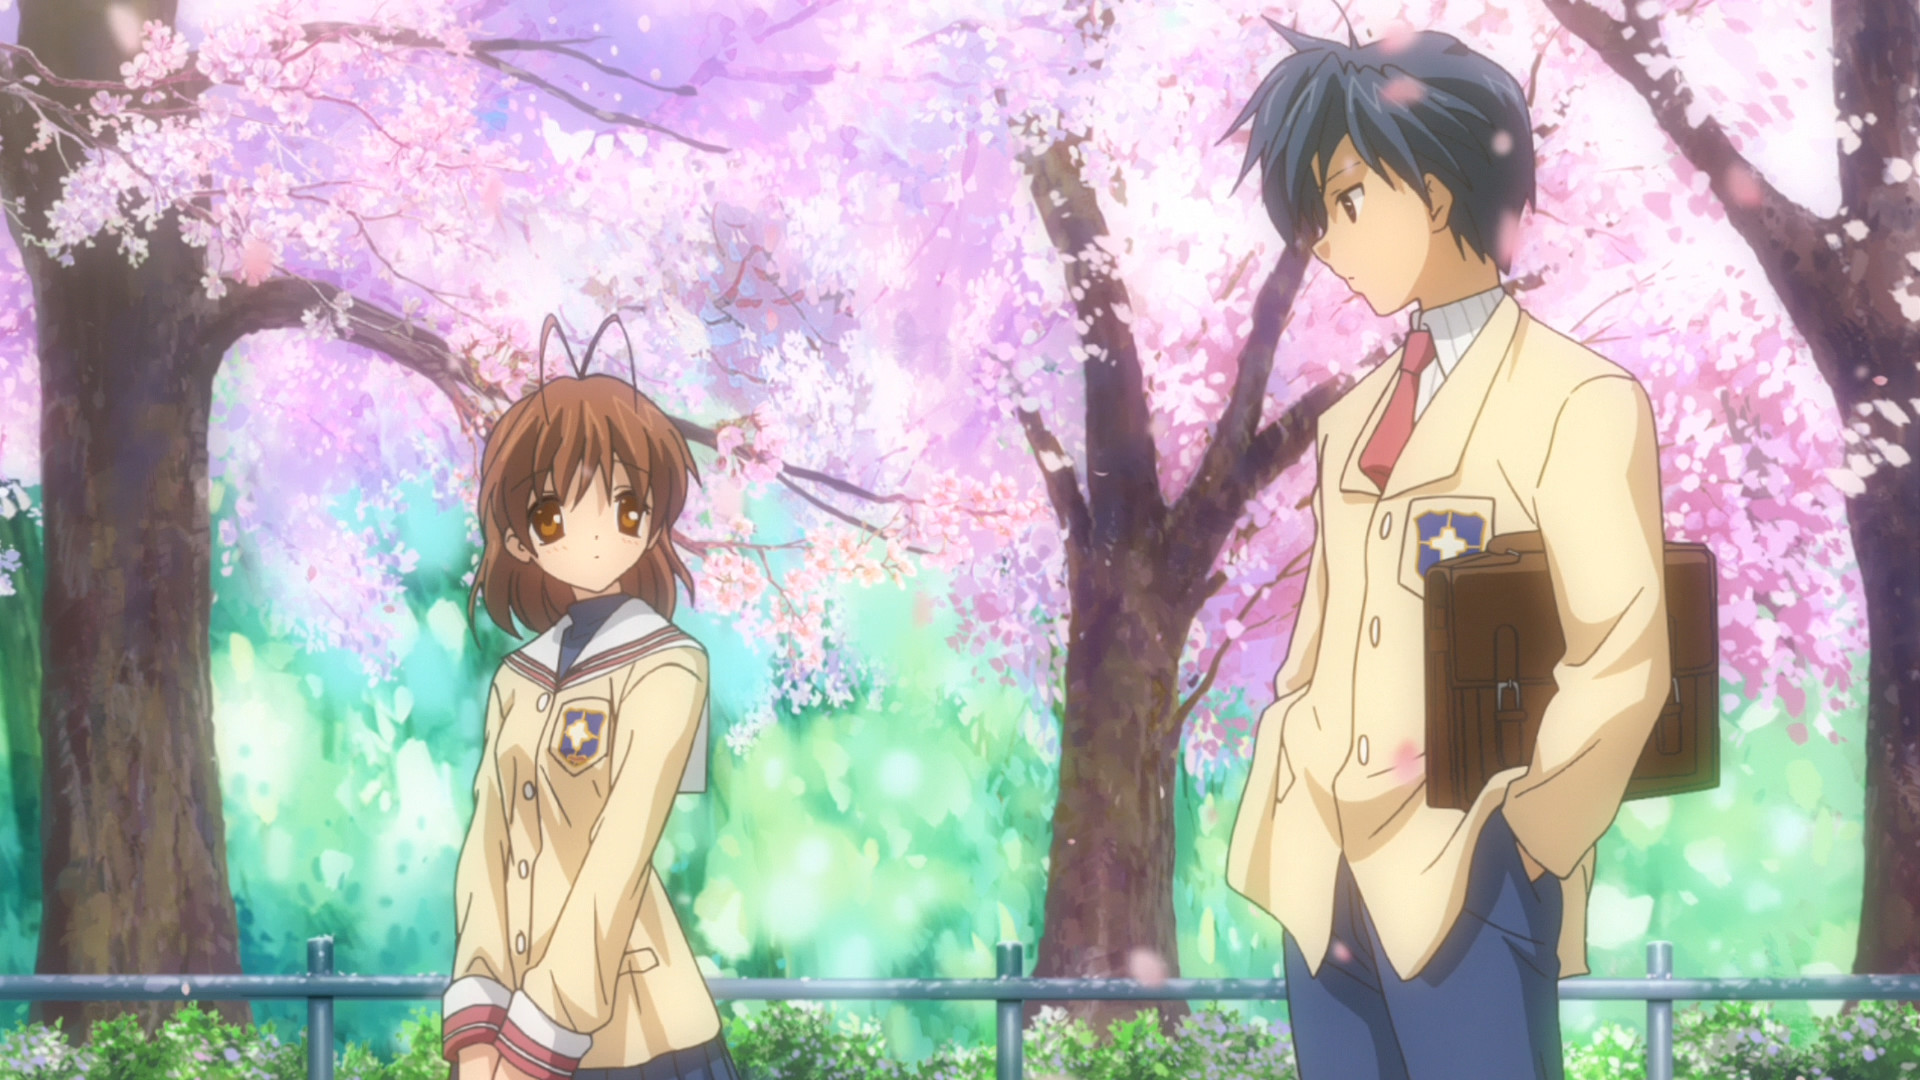 1920x1080 Clannad Episode 1 – On The Hillside Path Where The Cherry Blossoms Flutter